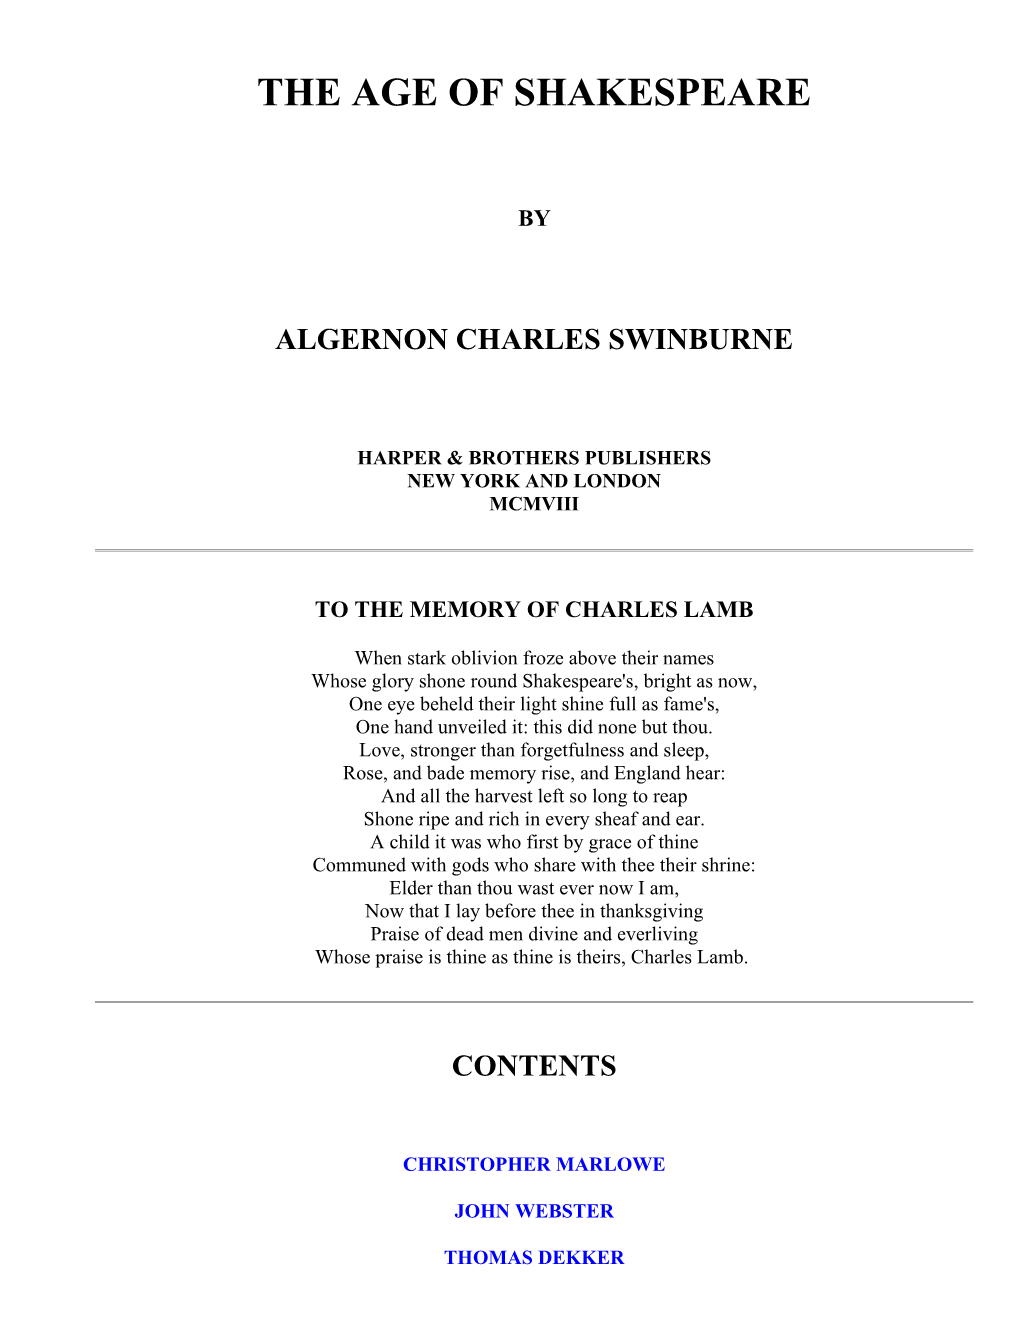 The Project Gutenberg Ebook of the Age of Shakespeare, by Algernon Charles Swinburne